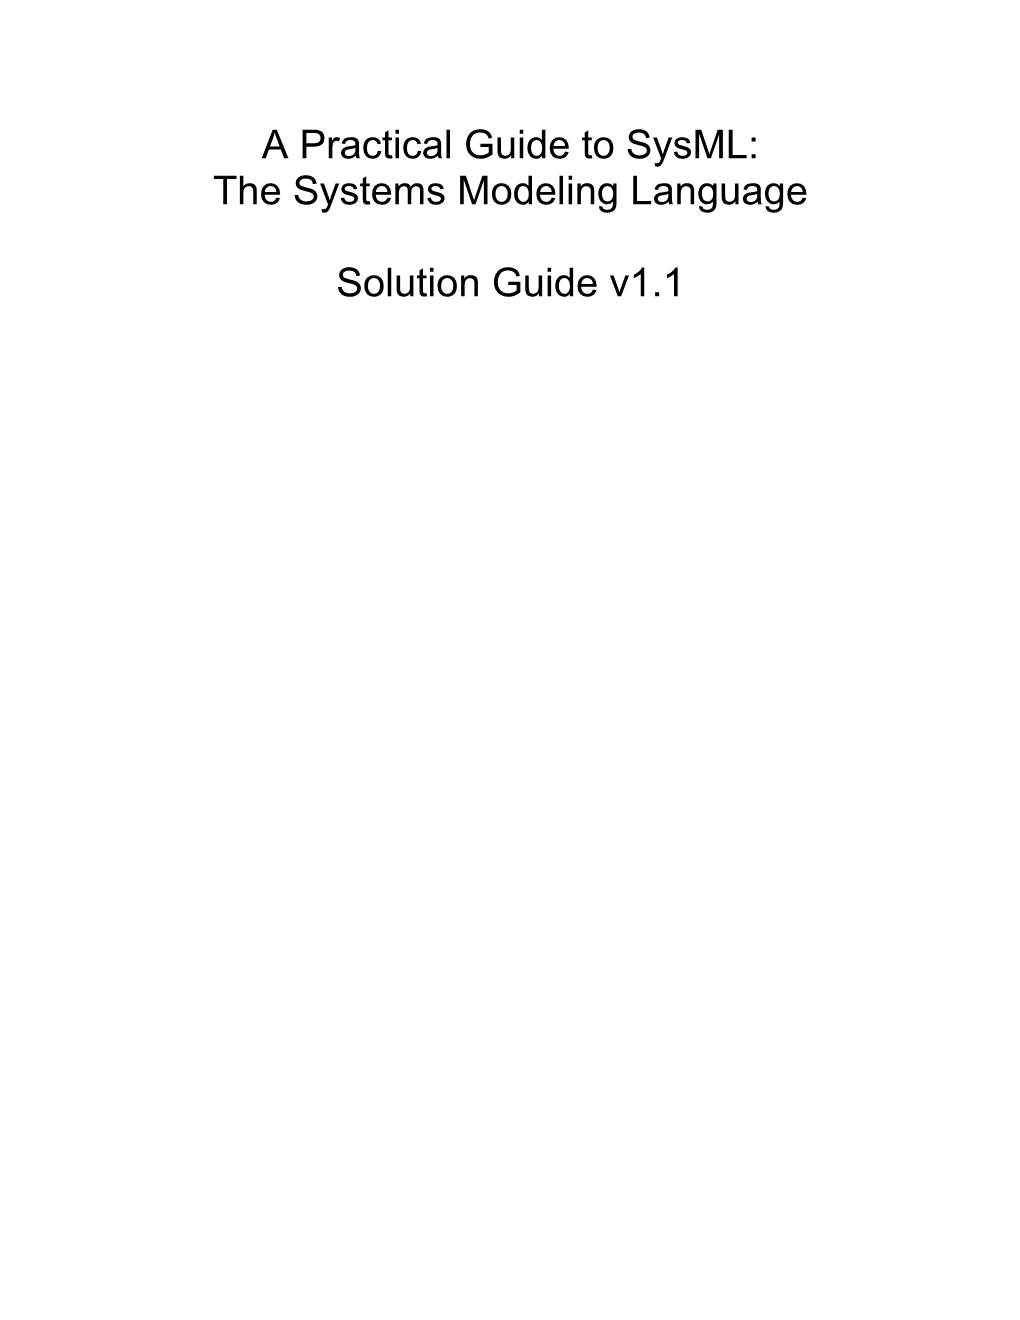 The Systems Modeling Language